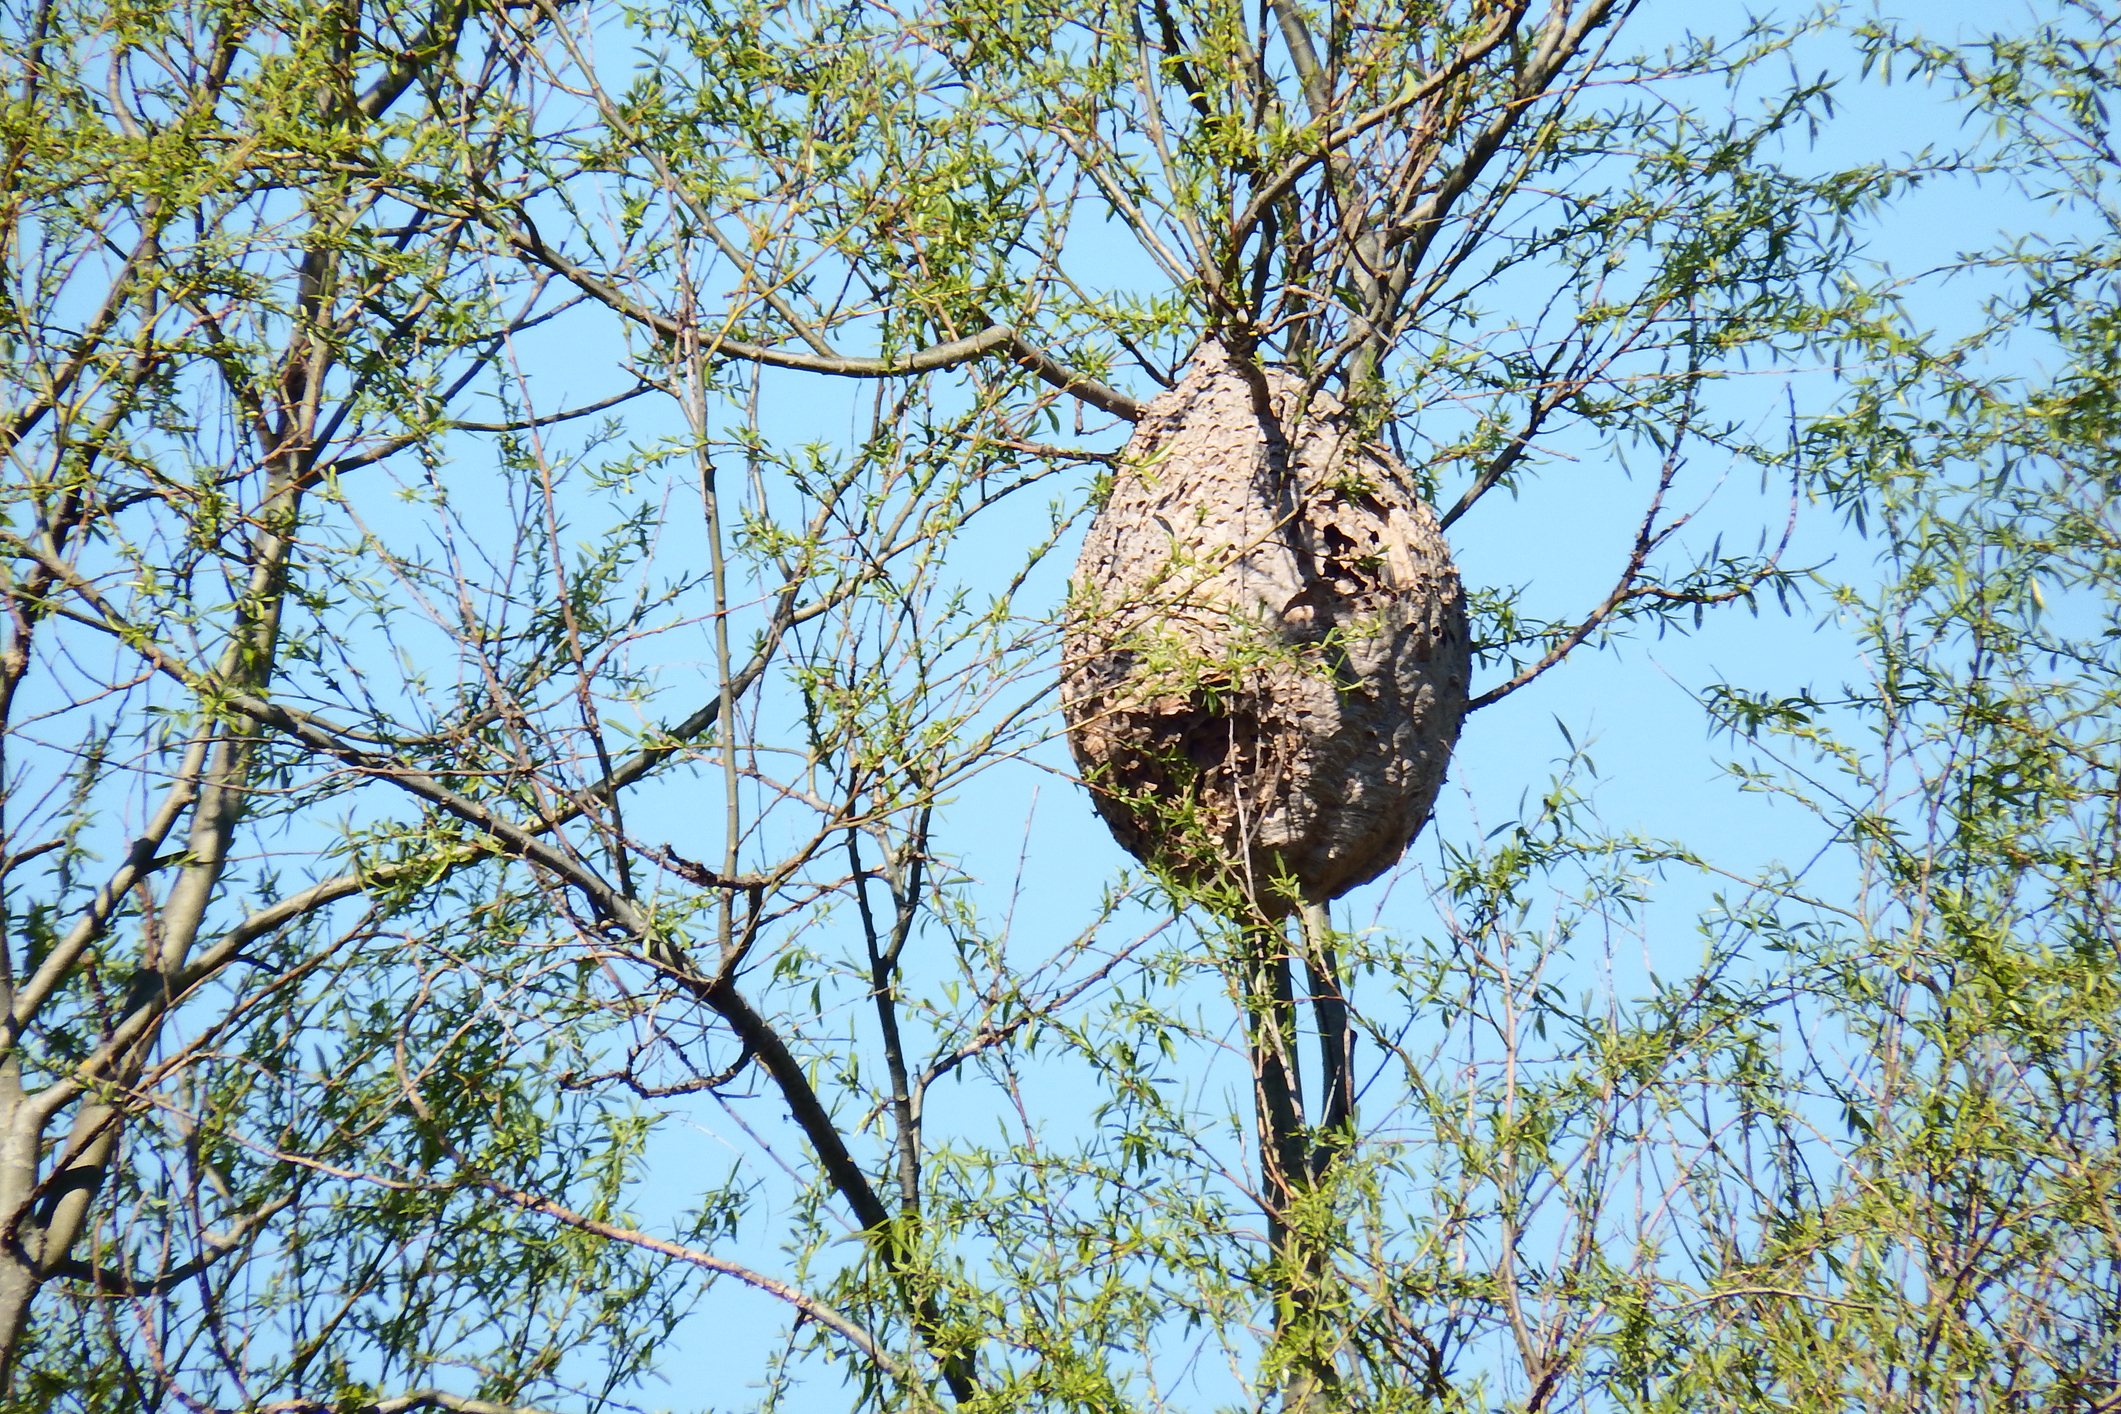 A large wasp nest hanging from a tree branch in daylight